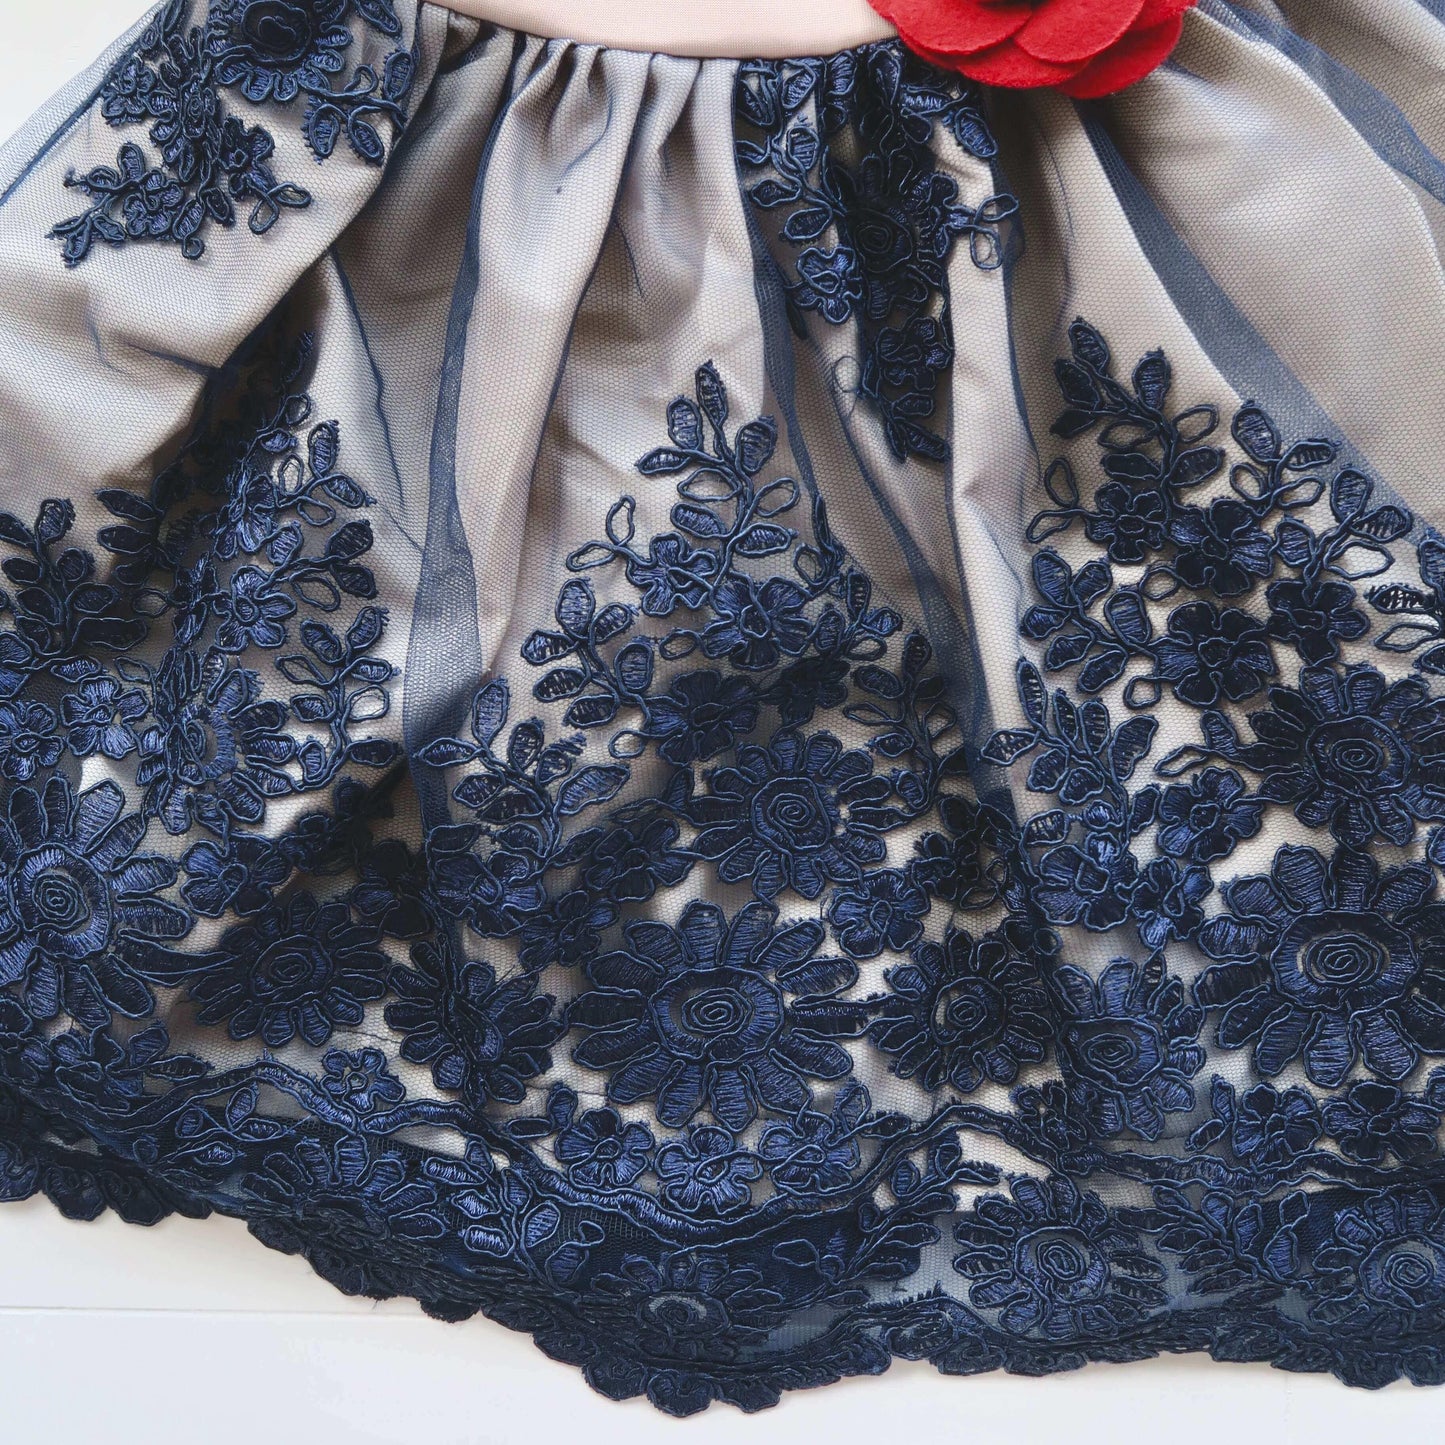 Dahlia Dress in Nude Neoprene and Navy Floral Tulle Embroidery - Lil' Tati